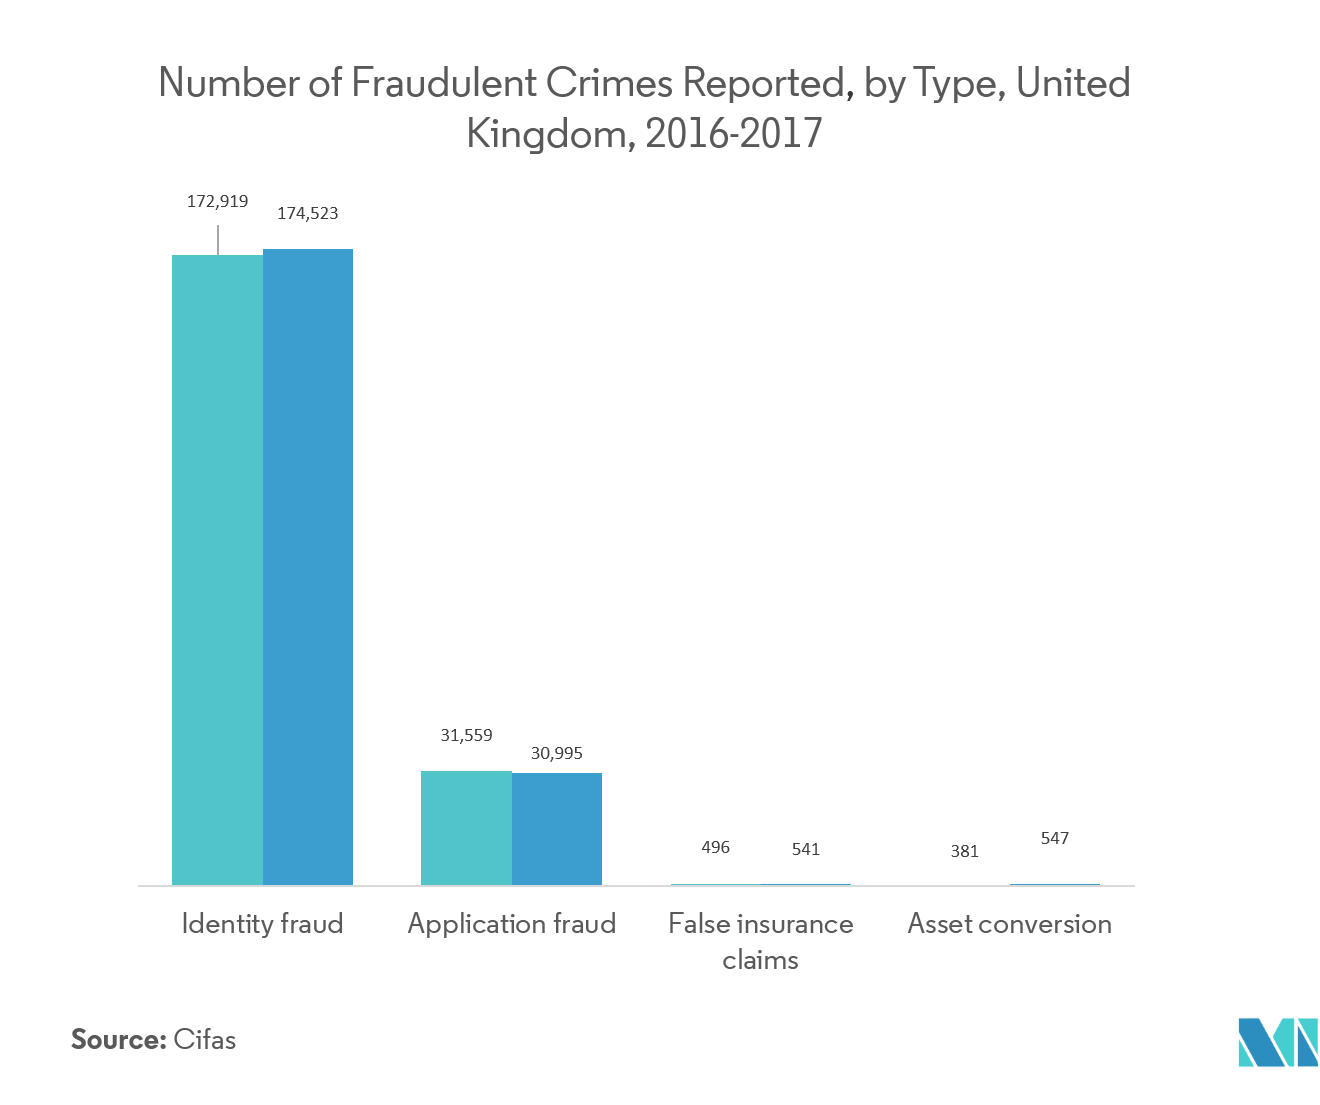 Number of Fraudulent Crimes Reported, by Type, United Kingdom, 2016 - 2017